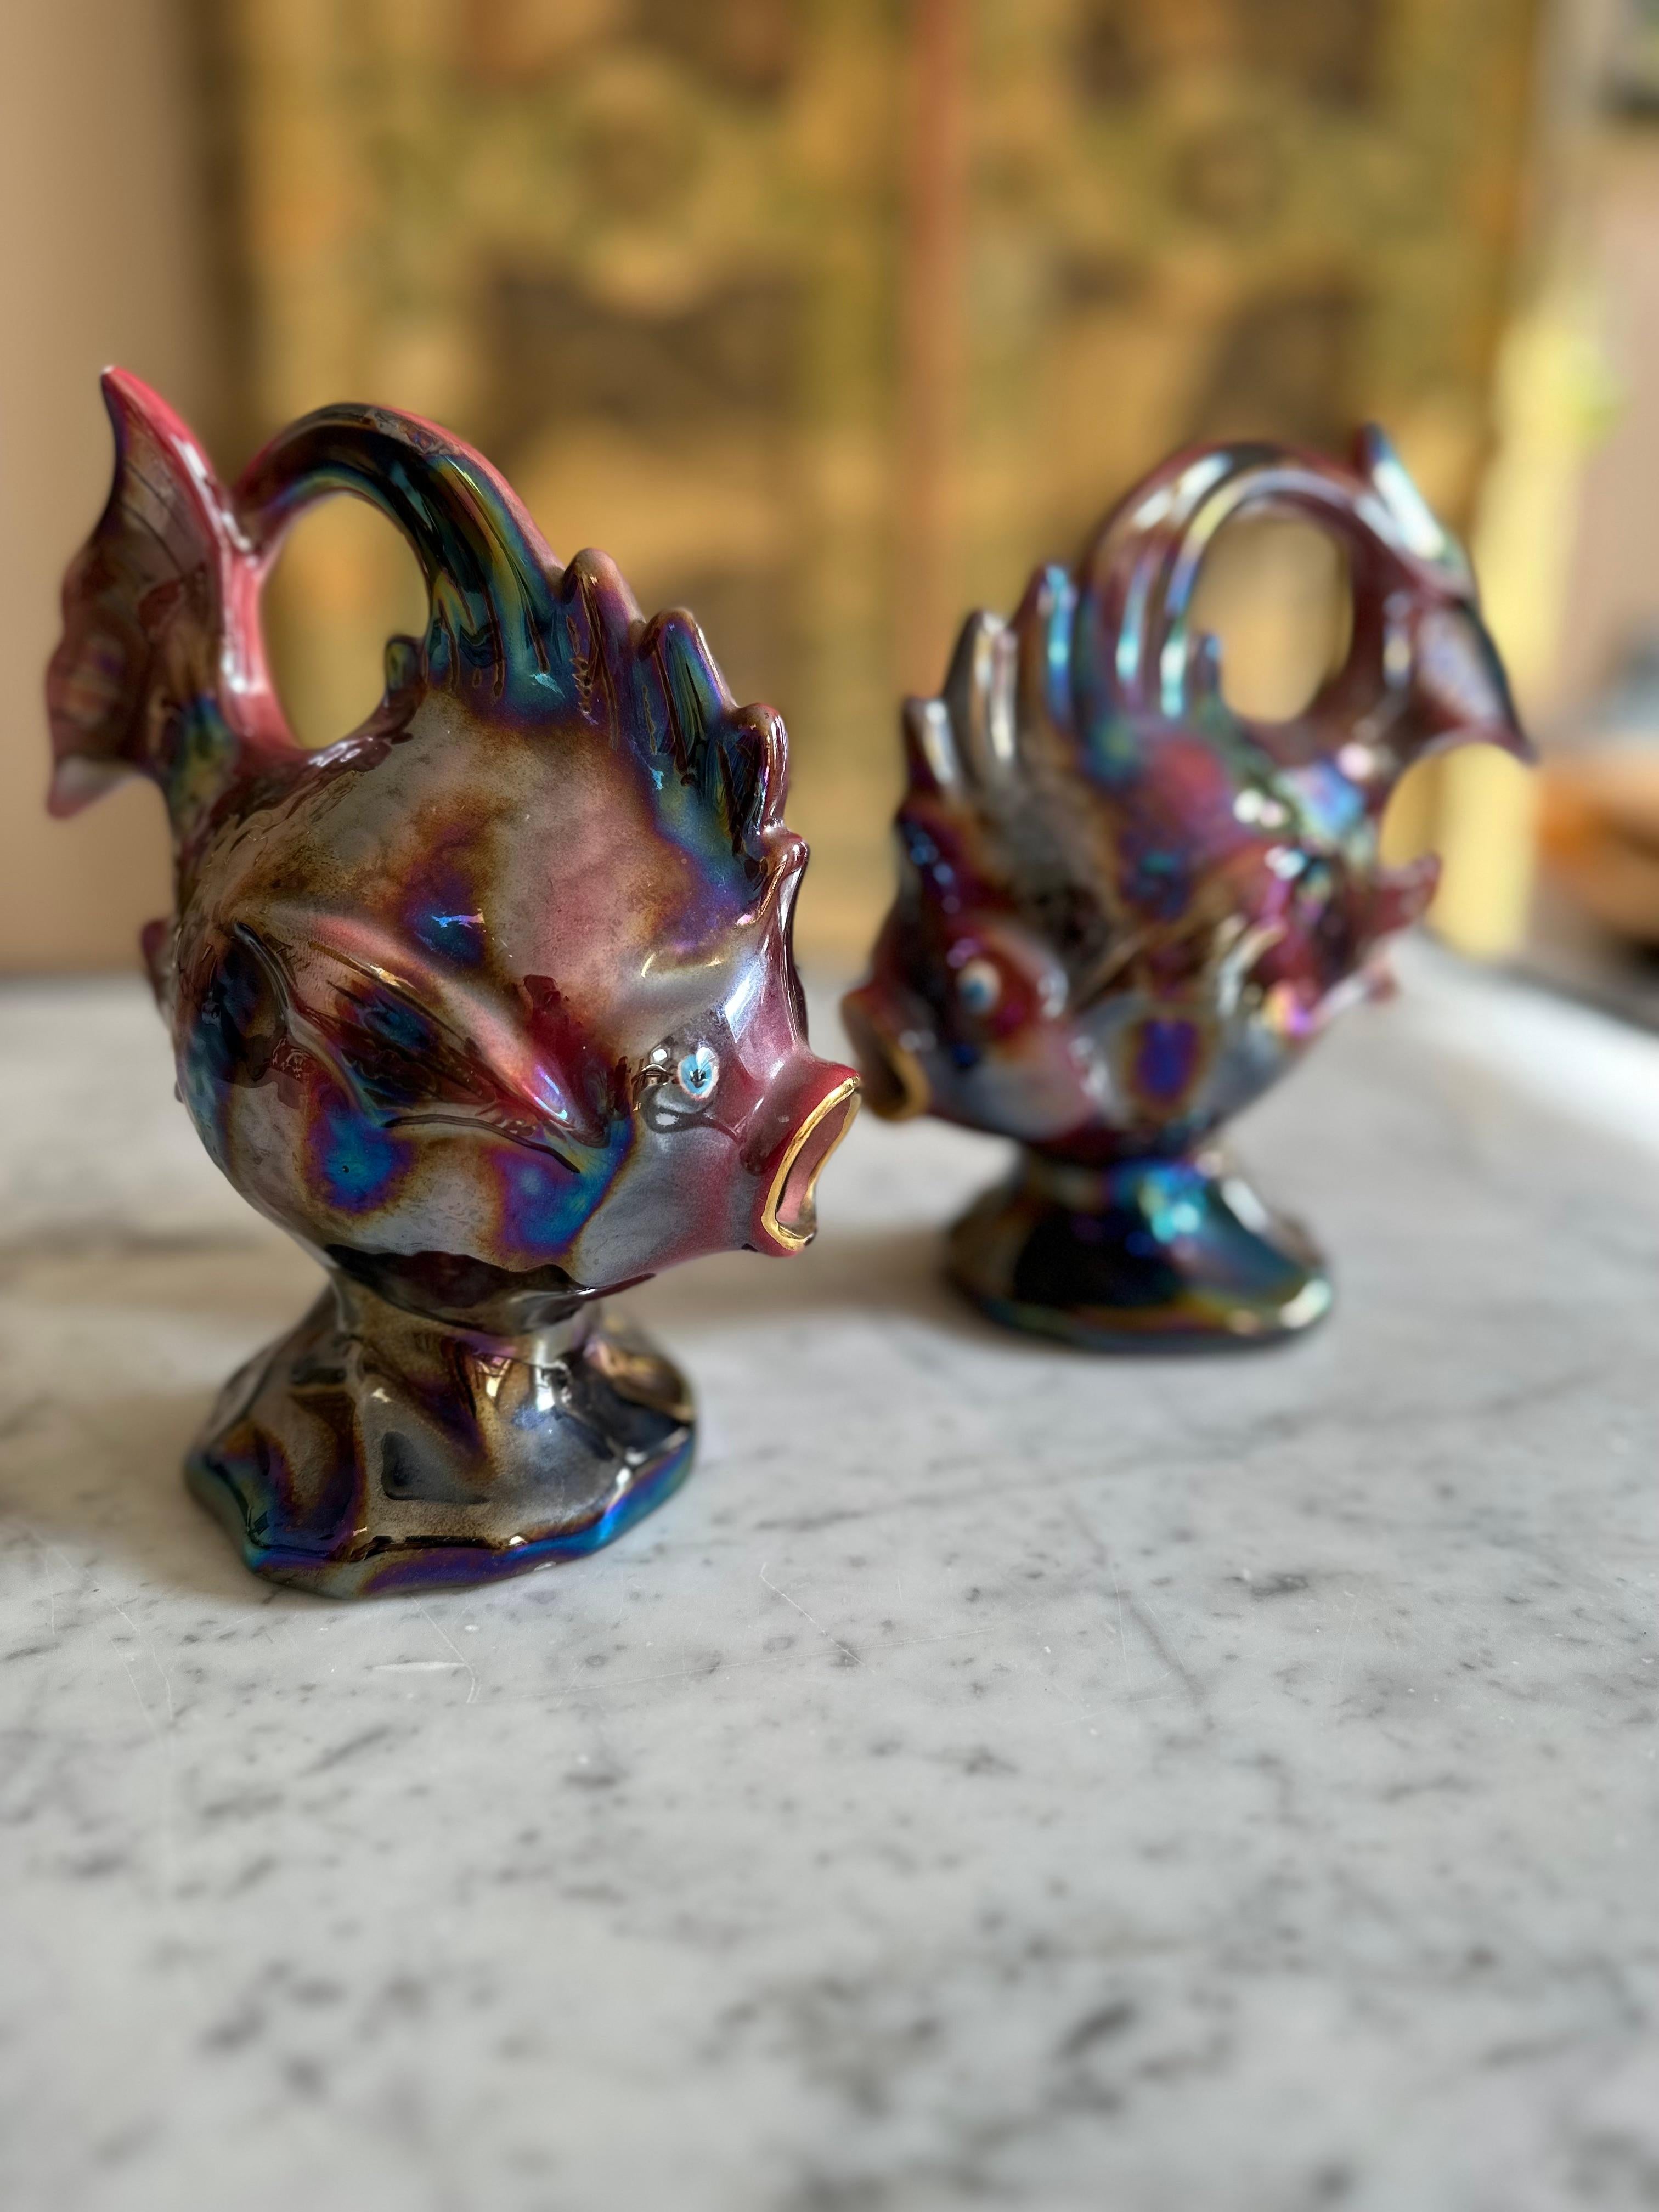 Introducing our delightful Pair of Ceramic Fish Figurines, a charming representation of mid-20th-century artistry from the enchanting city of Monaco, courtesy of Florence Monte Carlo. These whimsical fish come together as a playful couple, exuding a